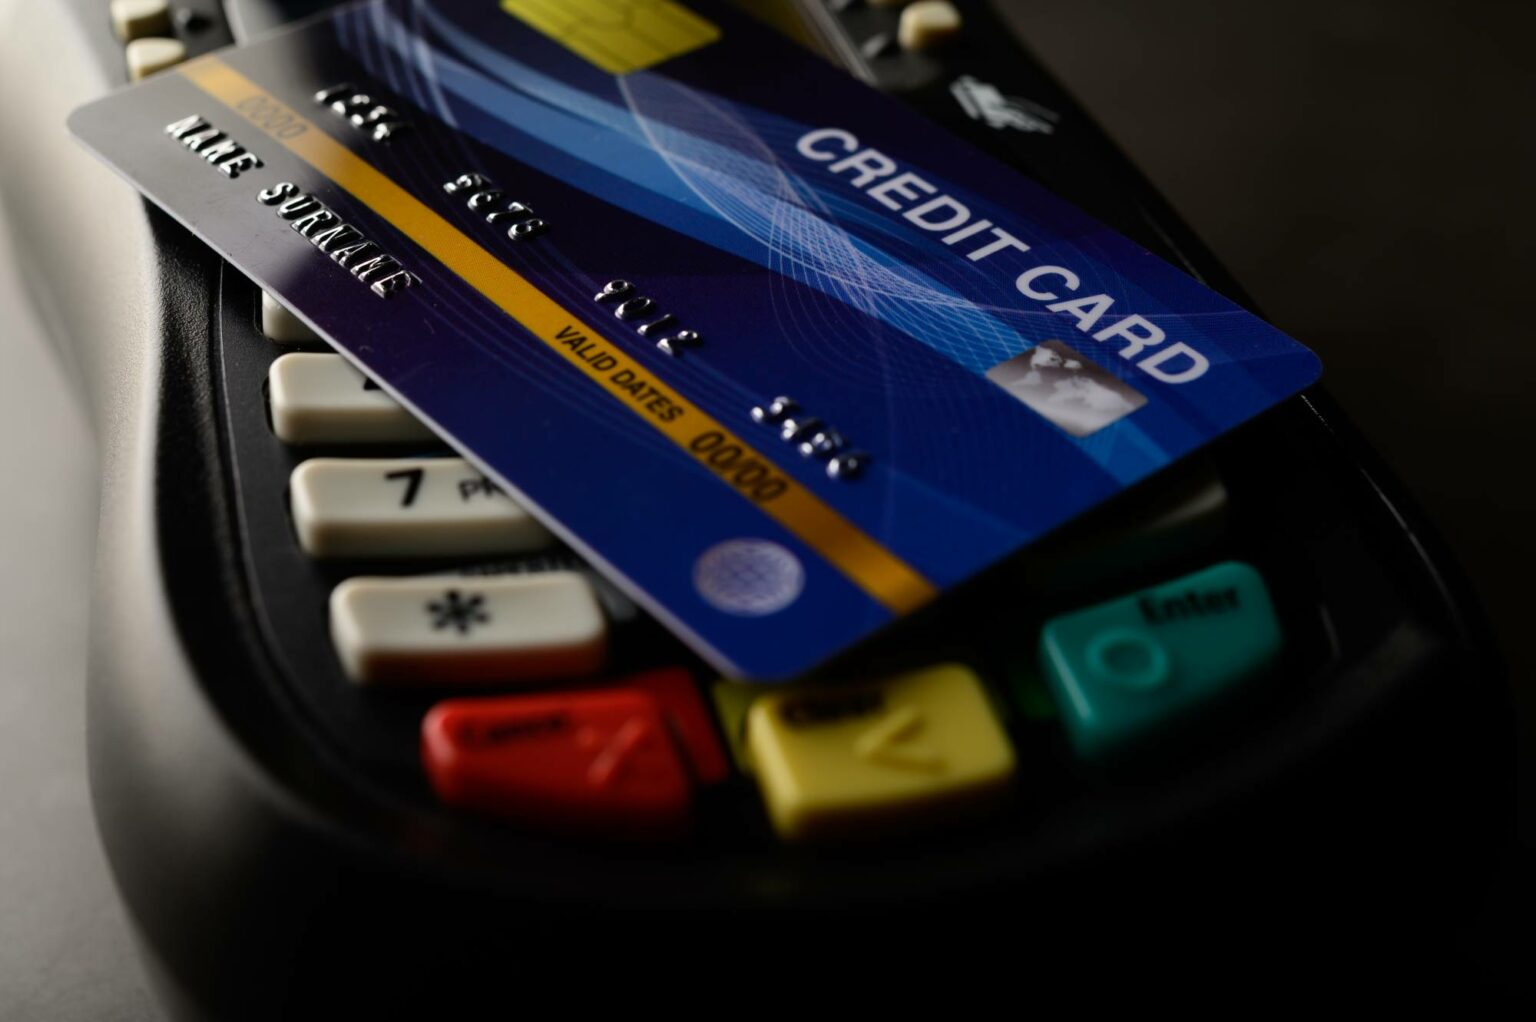 why does my credit card keep getting declined on crypto.com